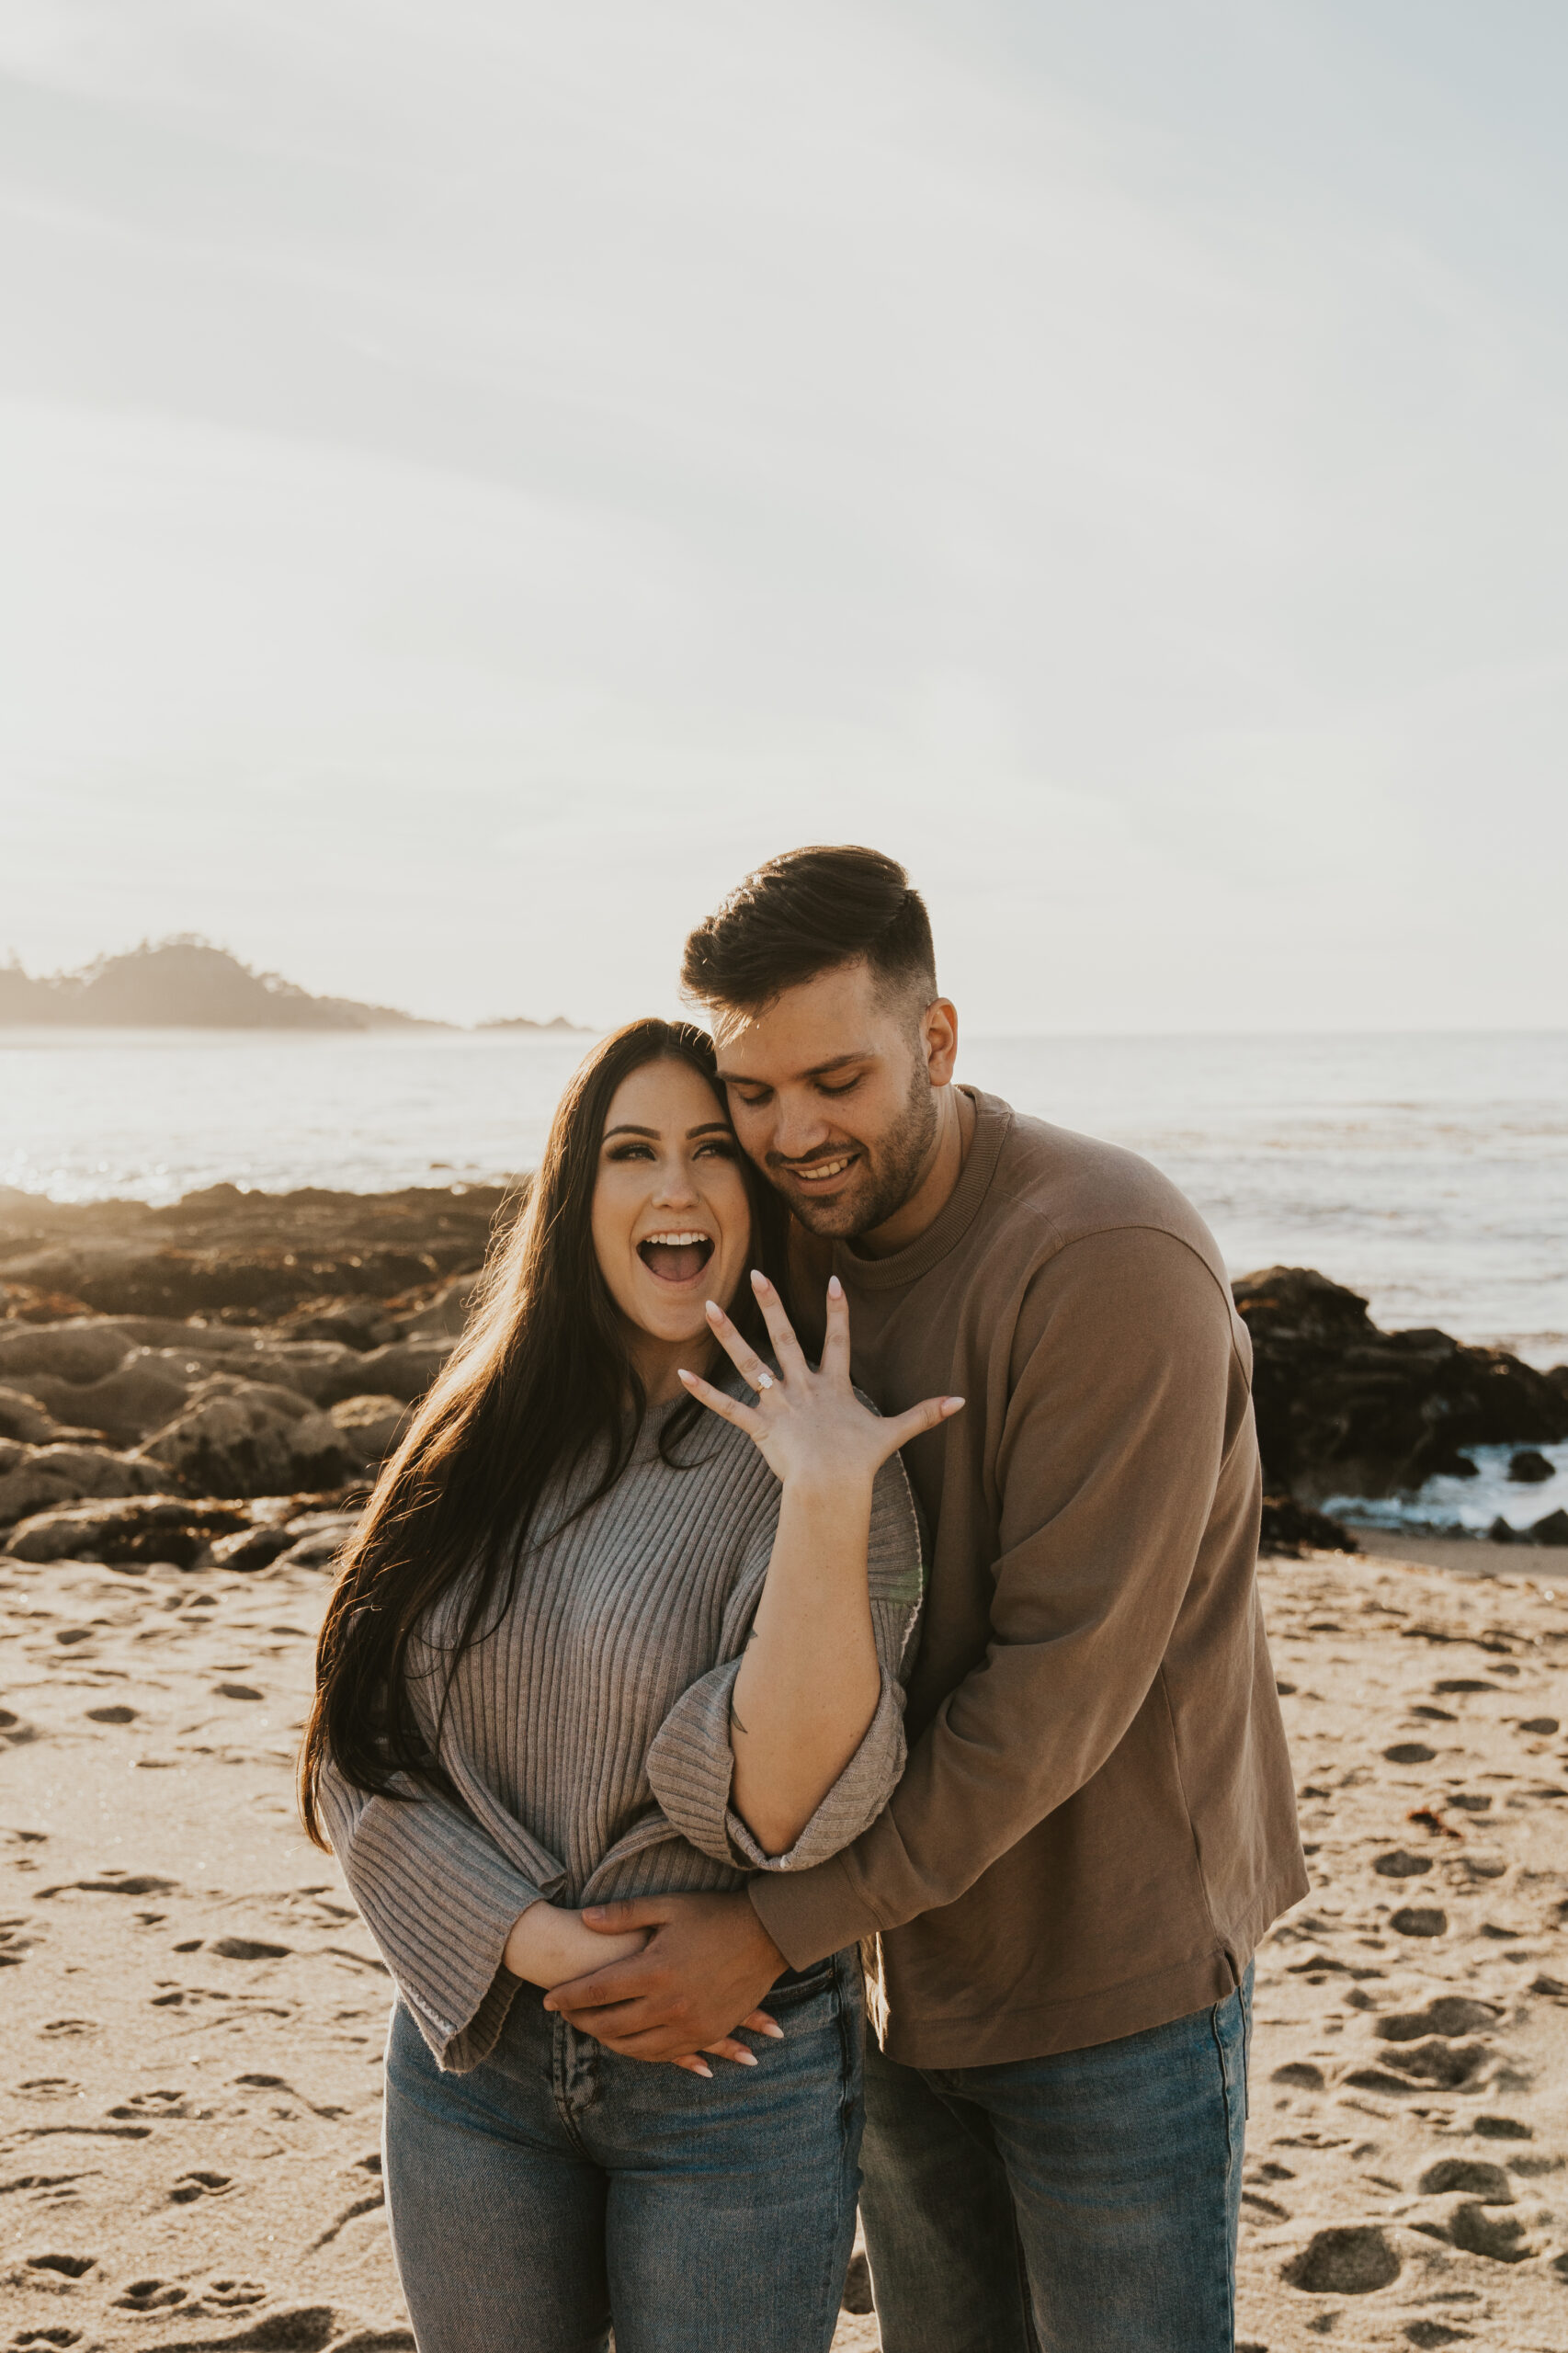 Newly engaged couple shows off the ring standing on the beach in Carmel-by-the-Sea